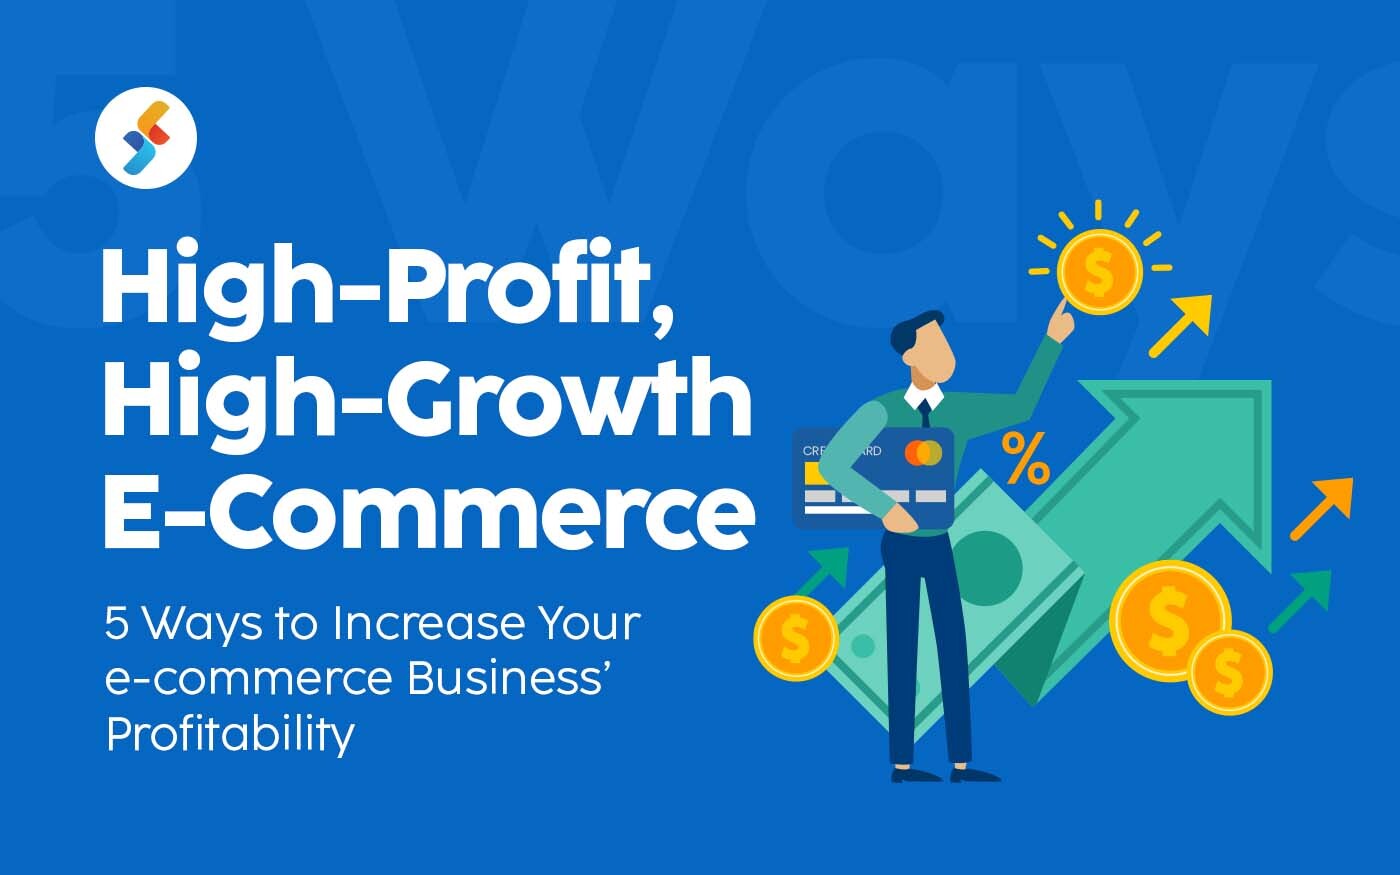 High-Profit, High-Growth E-Commerce: 5 Ways to Increase the Profitability of Your E-commerce Business